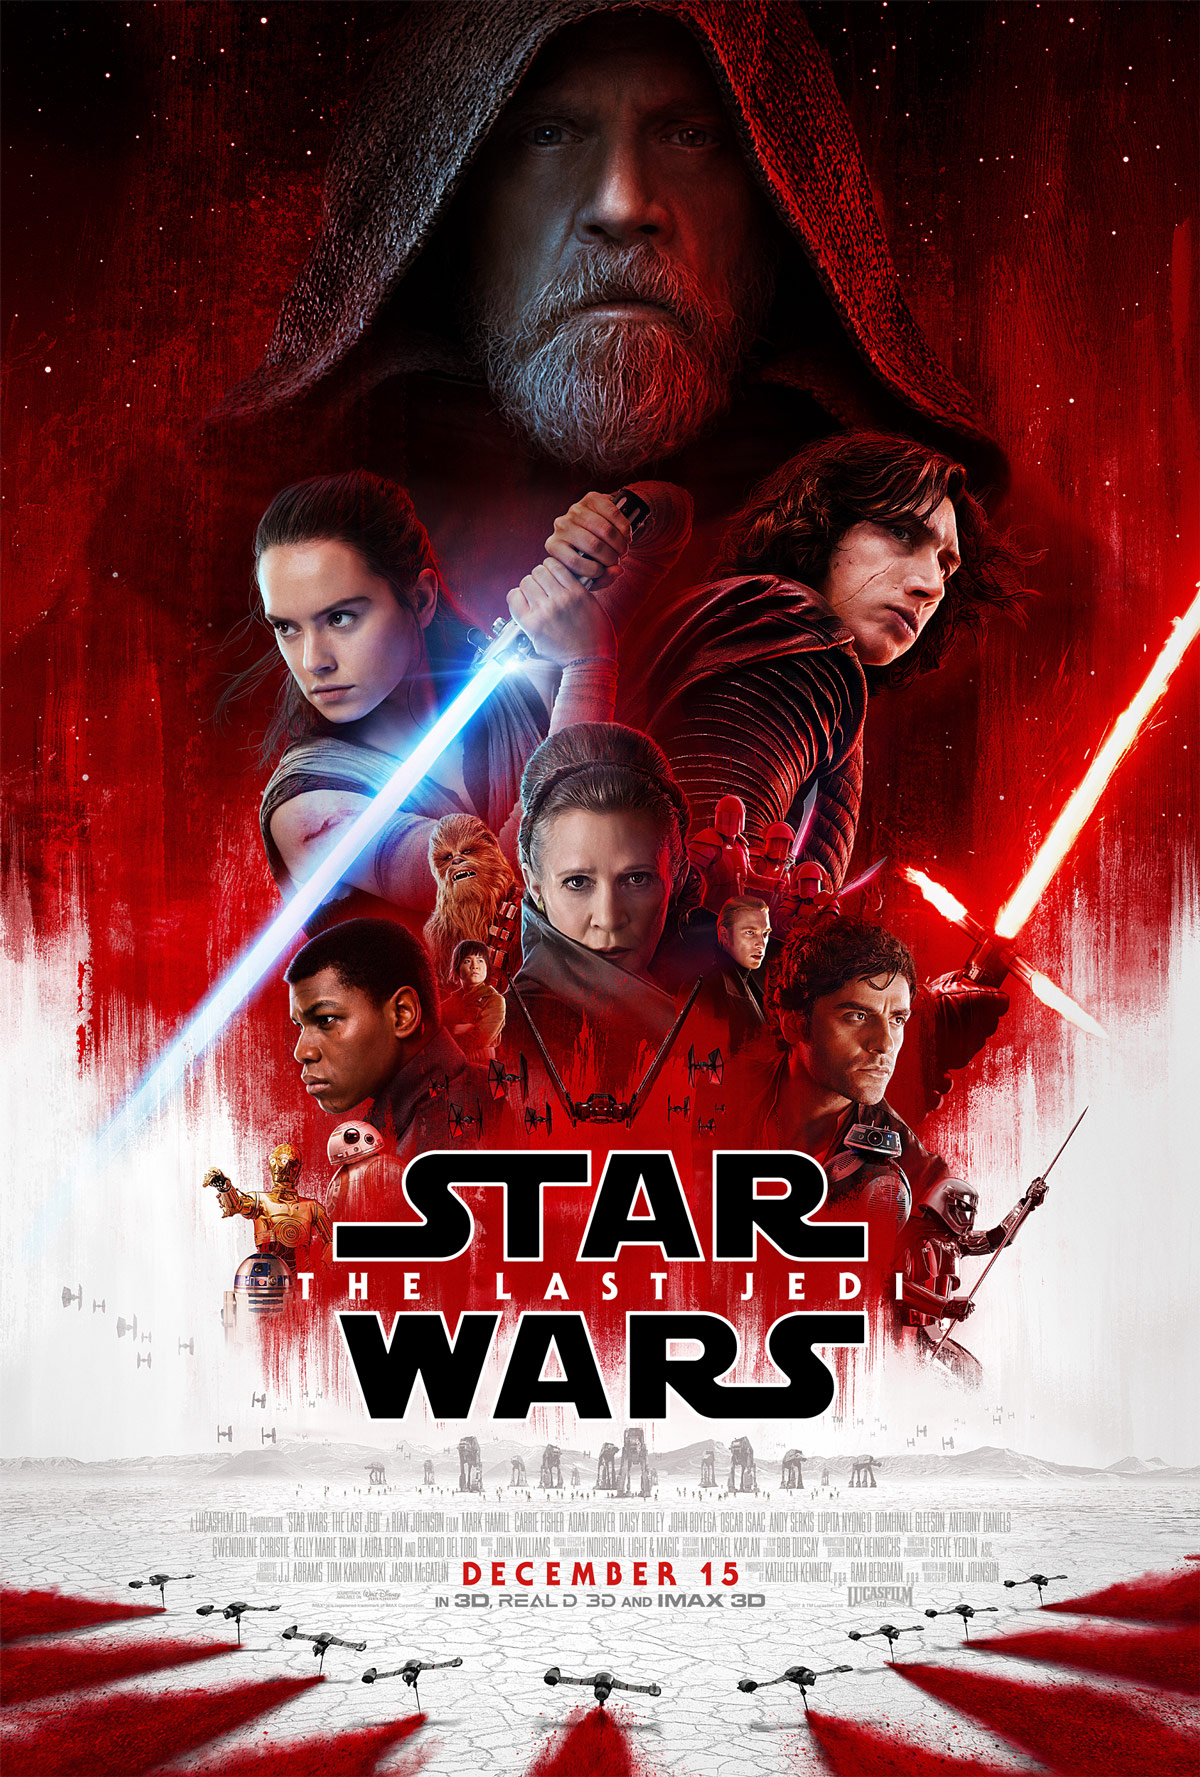 Best Movie of the Year – Star Wars: The Last Jedi?